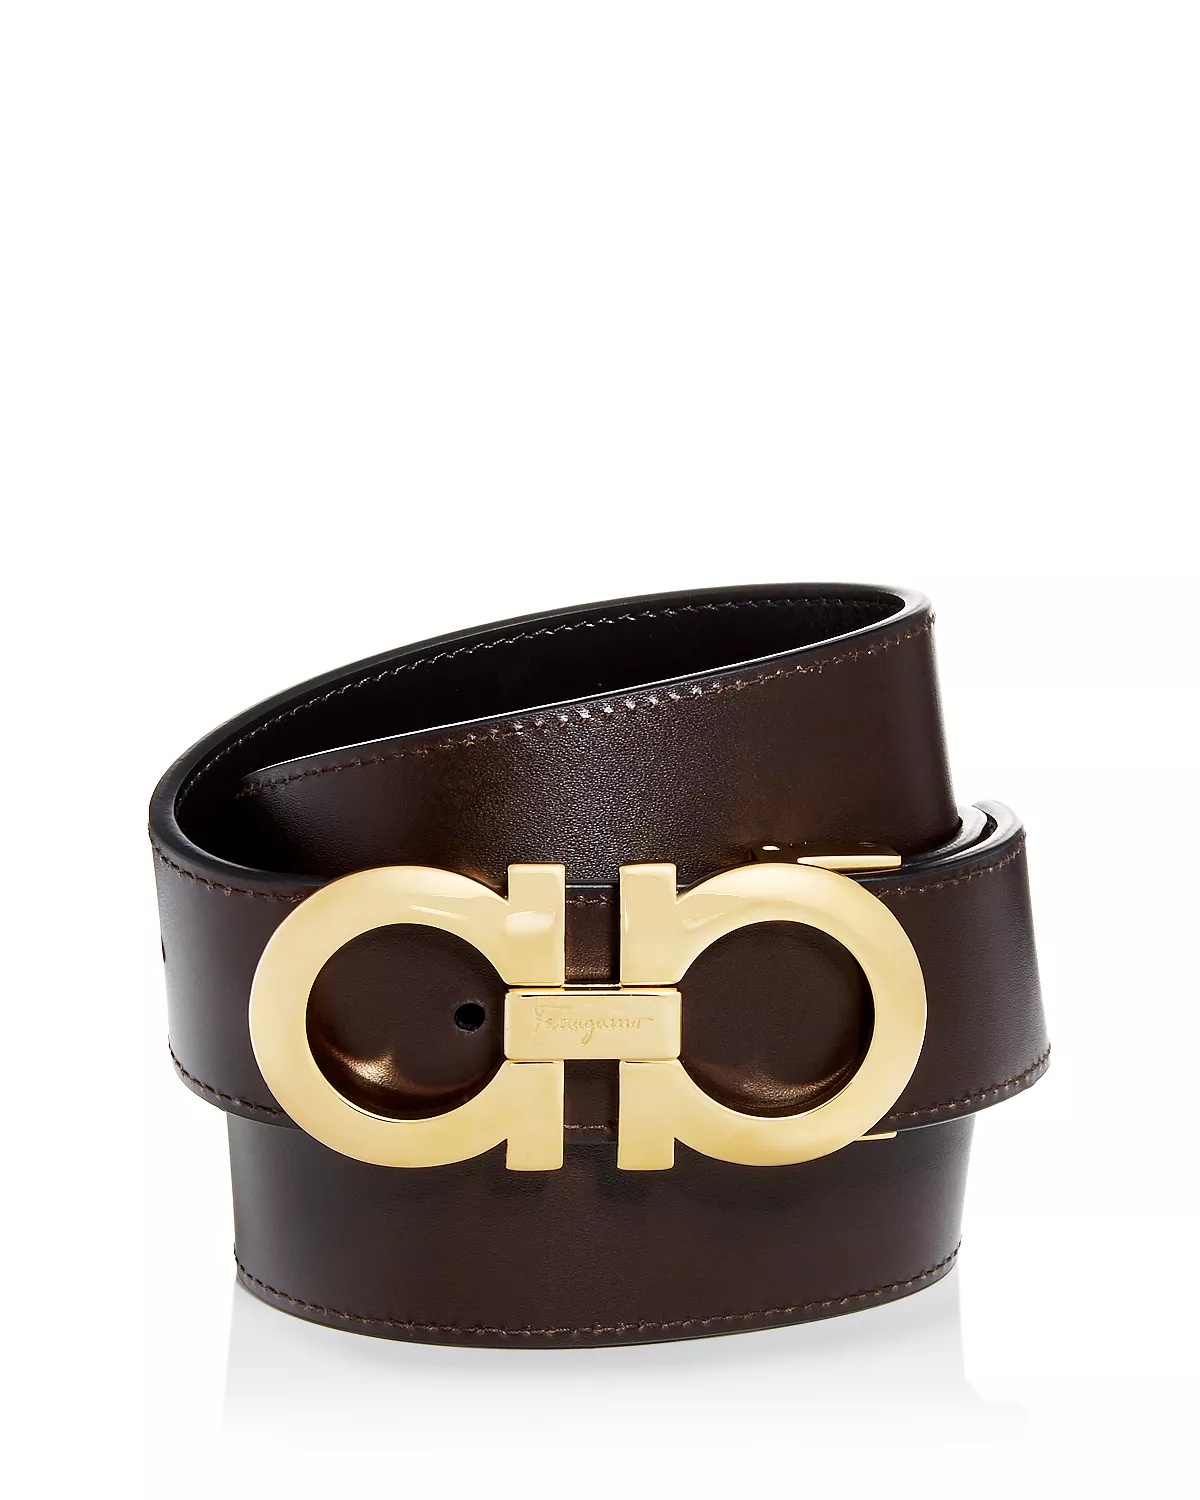 Men's Smooth Reversible Belt with Shiny Goldtone Double Gancini Buckle - 1